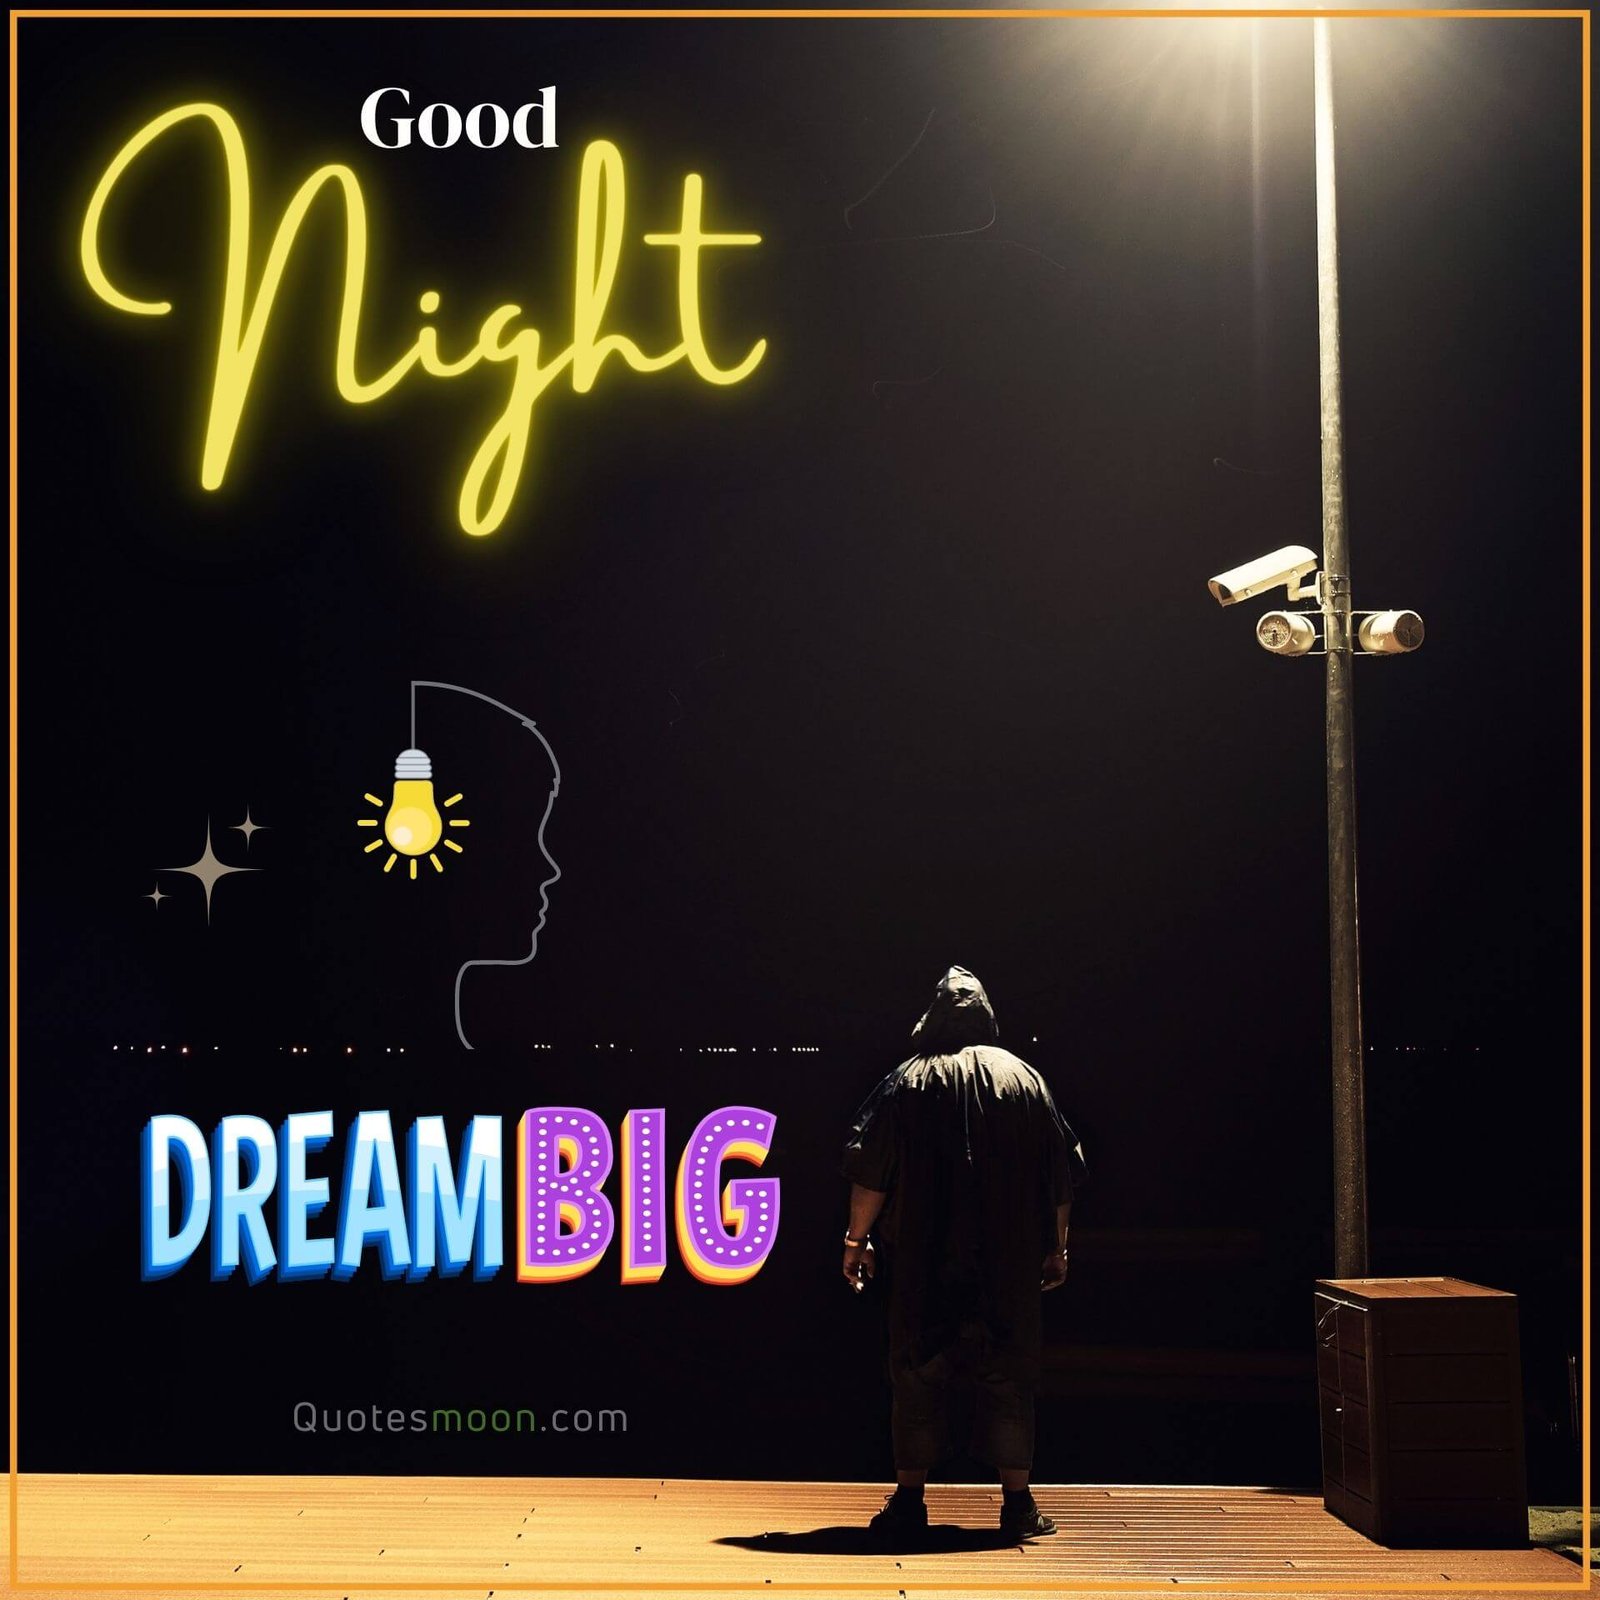 dream big night wishes photos collection